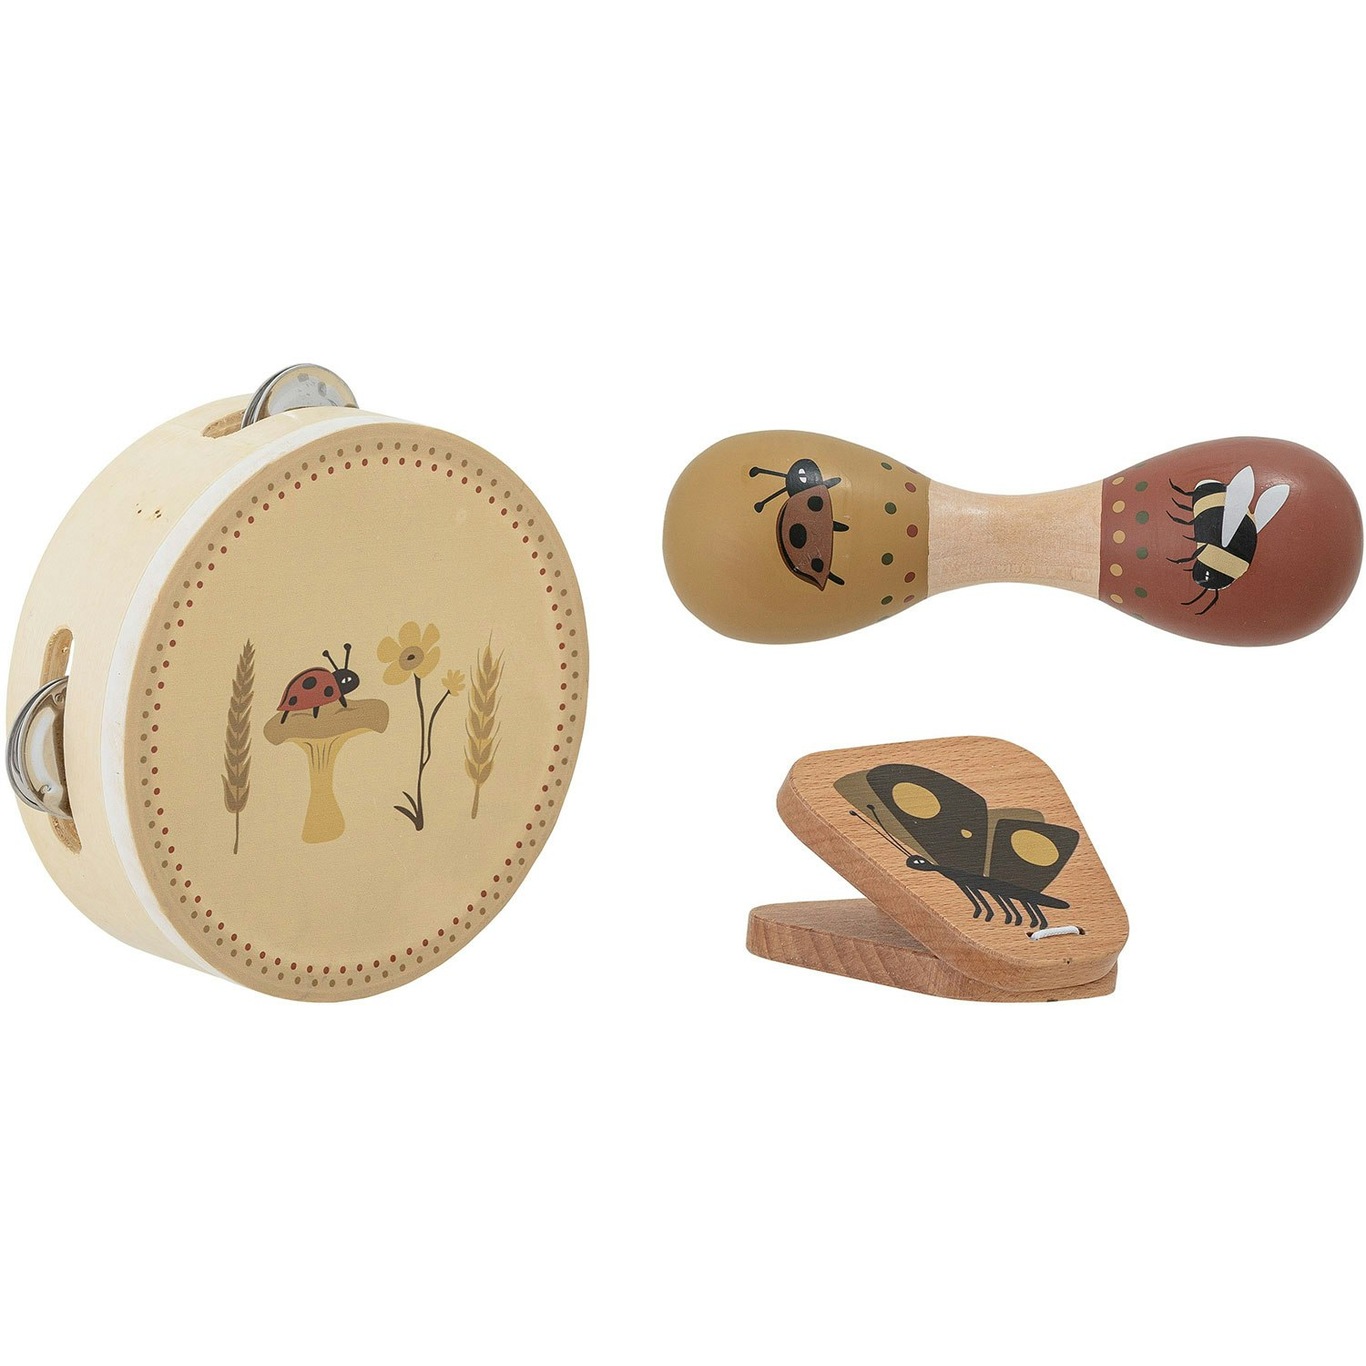 Driss Toy Instruments Plywood 3 Pieces